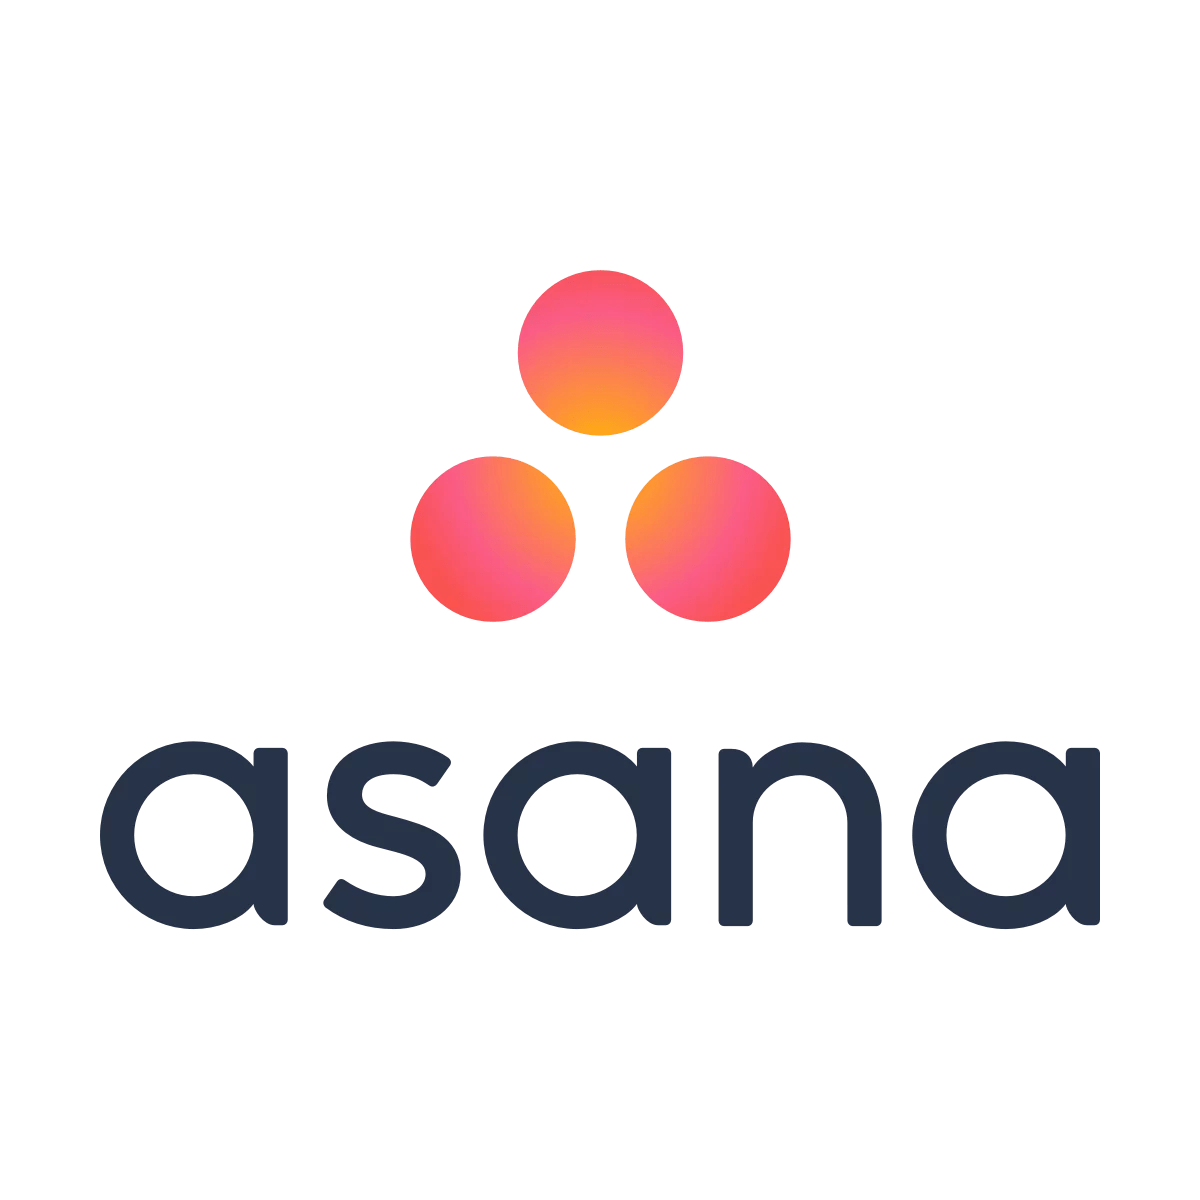 Asana is a web and mobile work management platform designed to help teams organize, track, and manage their work.